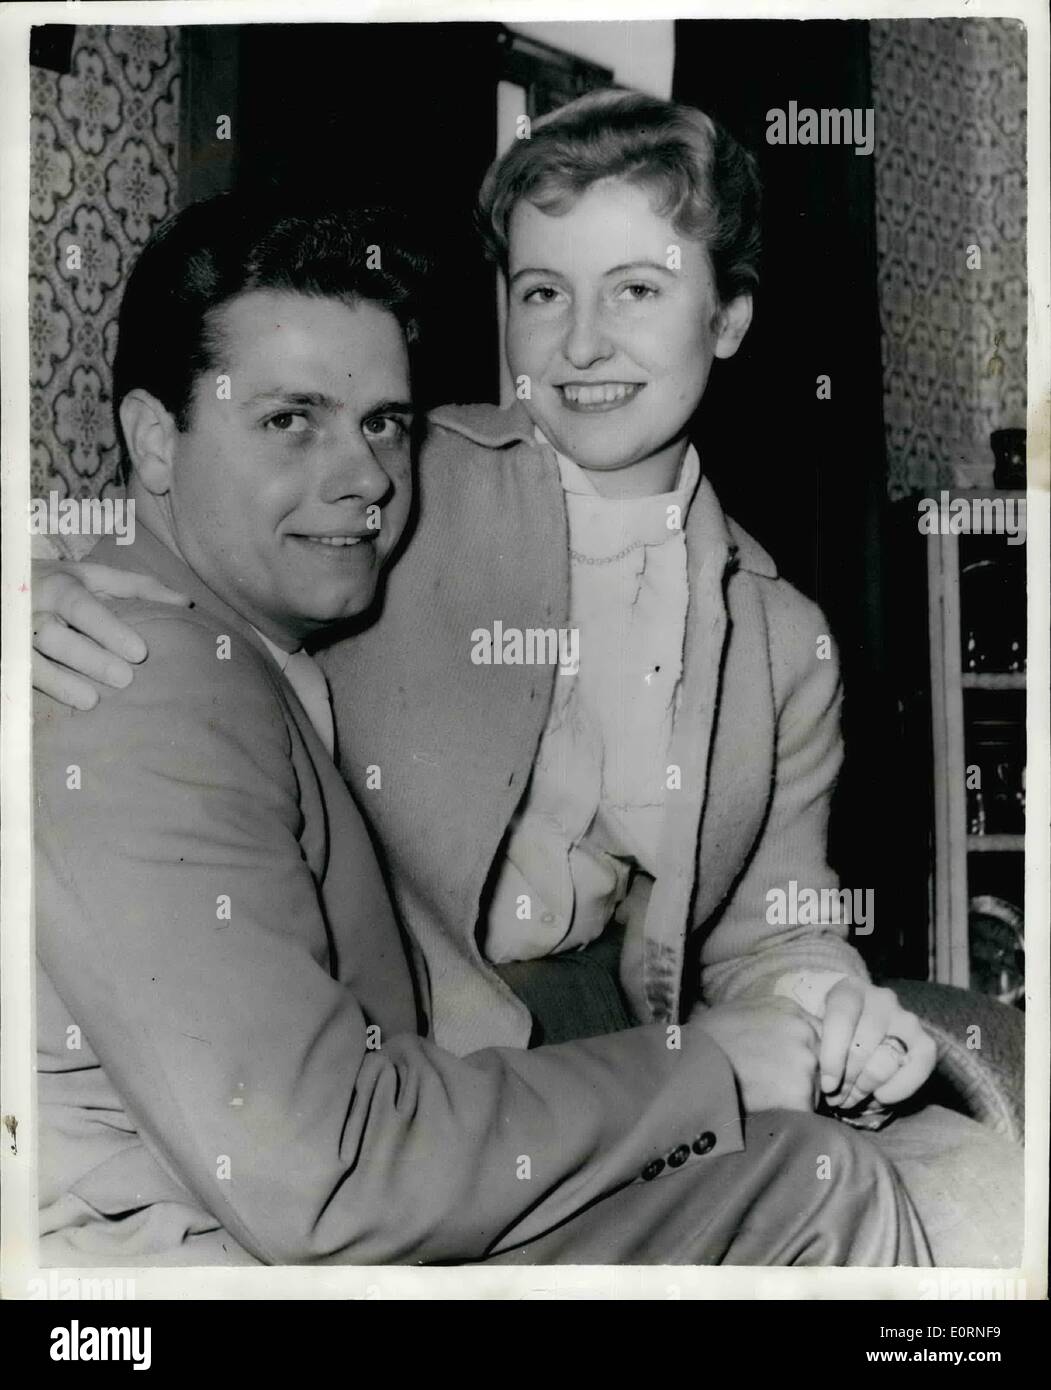 Feb. 02, 1960 - Handsome American gives up everything To Marry a girl he had never seen. Twenty six year old Gil Sousa of Bad Axe, near Detroit , Michigan had given up his home a 2,000 a year job to come to Europe to marry a girl he had never seen. The girl is lovely Rosemary Weirich a 20 year old typist of Bremen, Germany. He fell in love with a photohraph of Rosemary , given him by a friend. They corresponded for six months and after 150 letters had passed between them he decided to come to Europe for his Rosemary Stock Photo